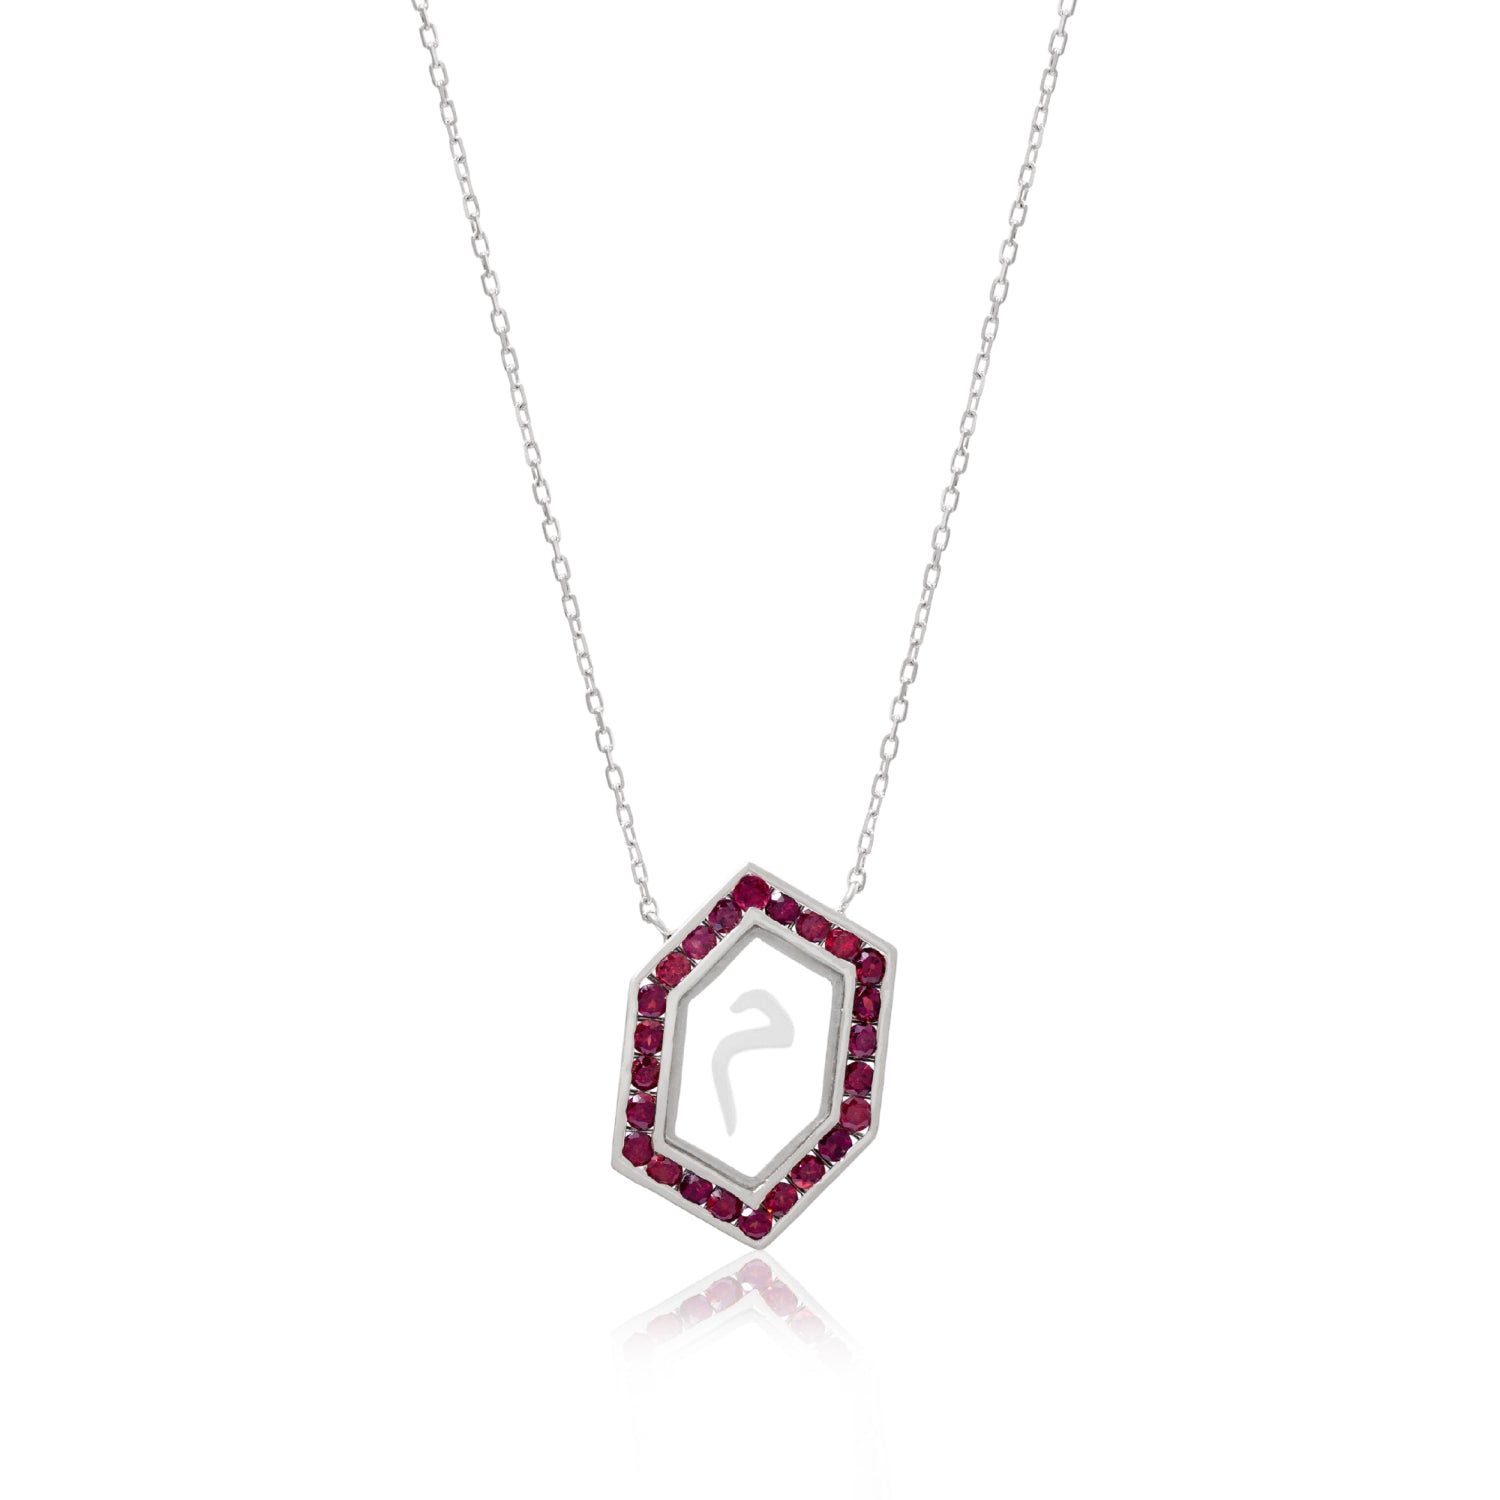 Qamoos 1.0 Letter م Ruby Necklace in White Gold